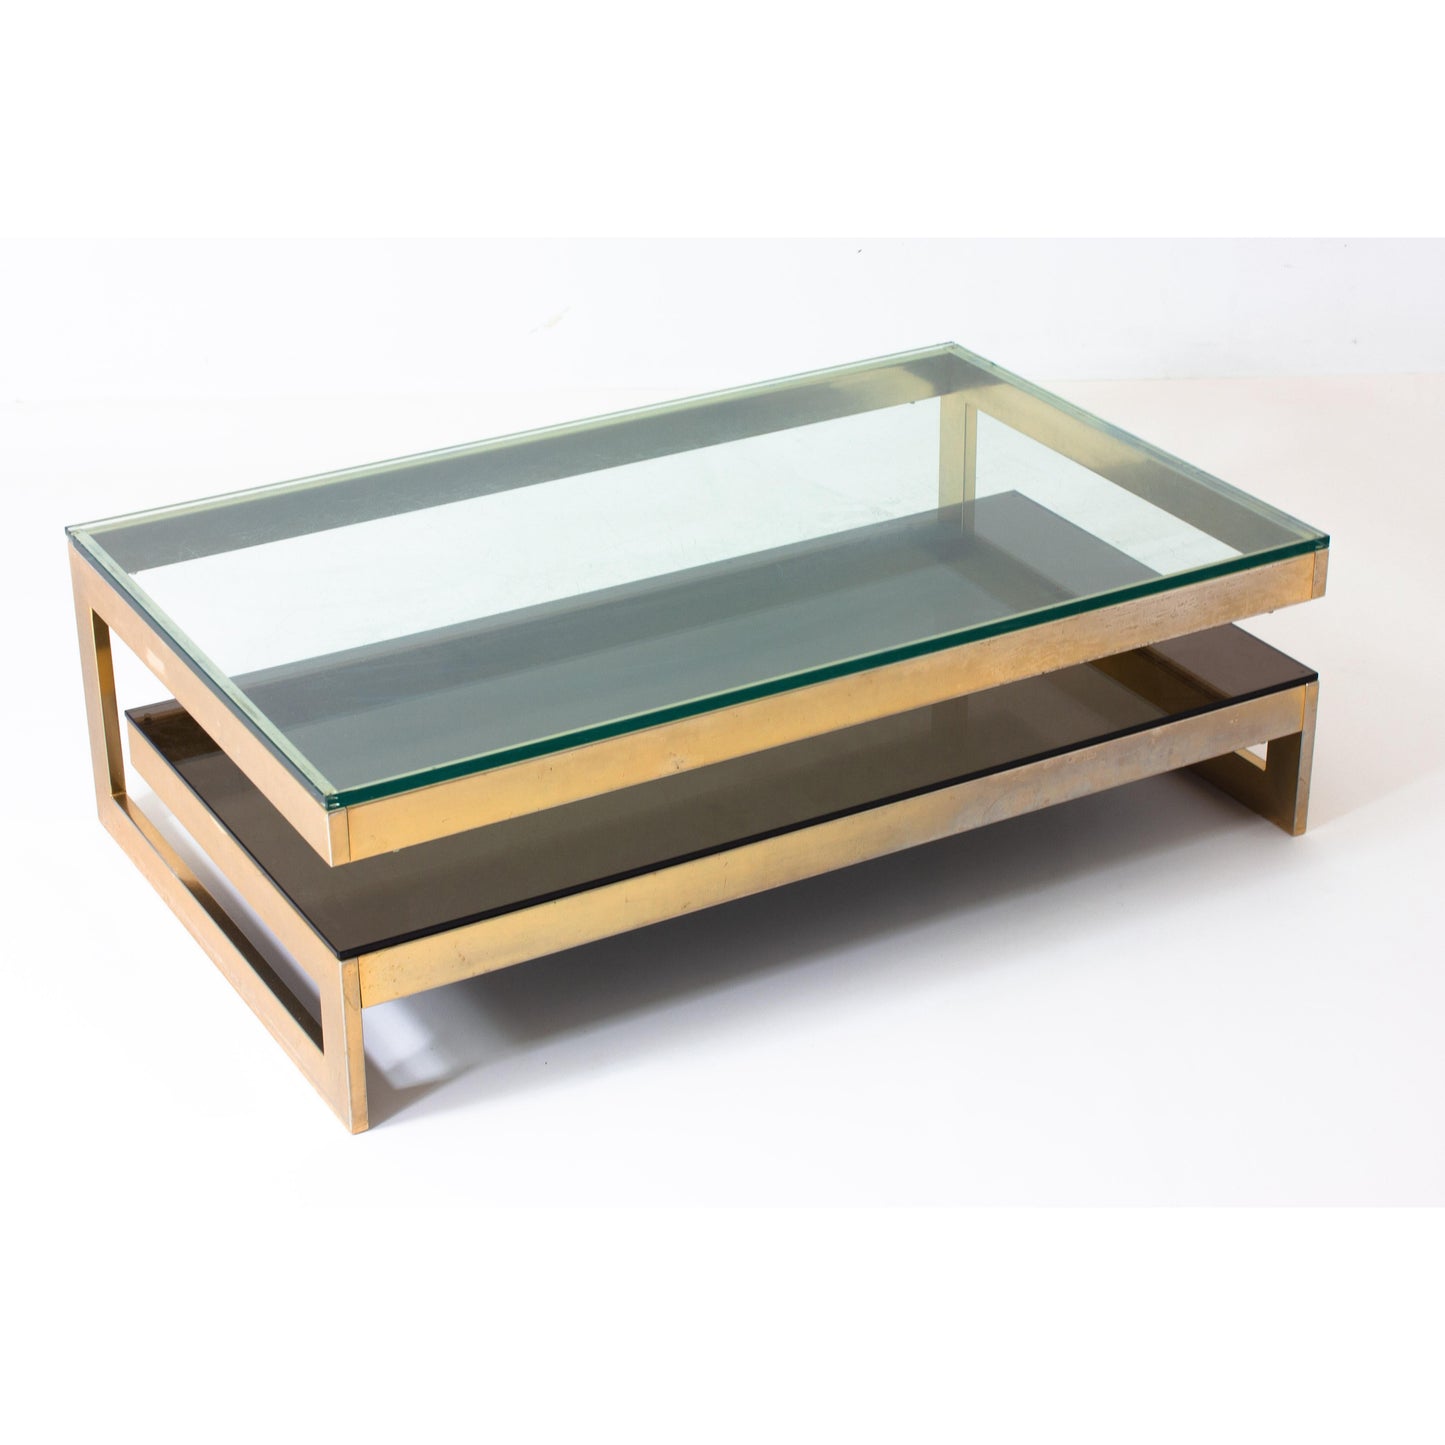 Stainless Steel Coffee Table 80×100 cm - MOD185